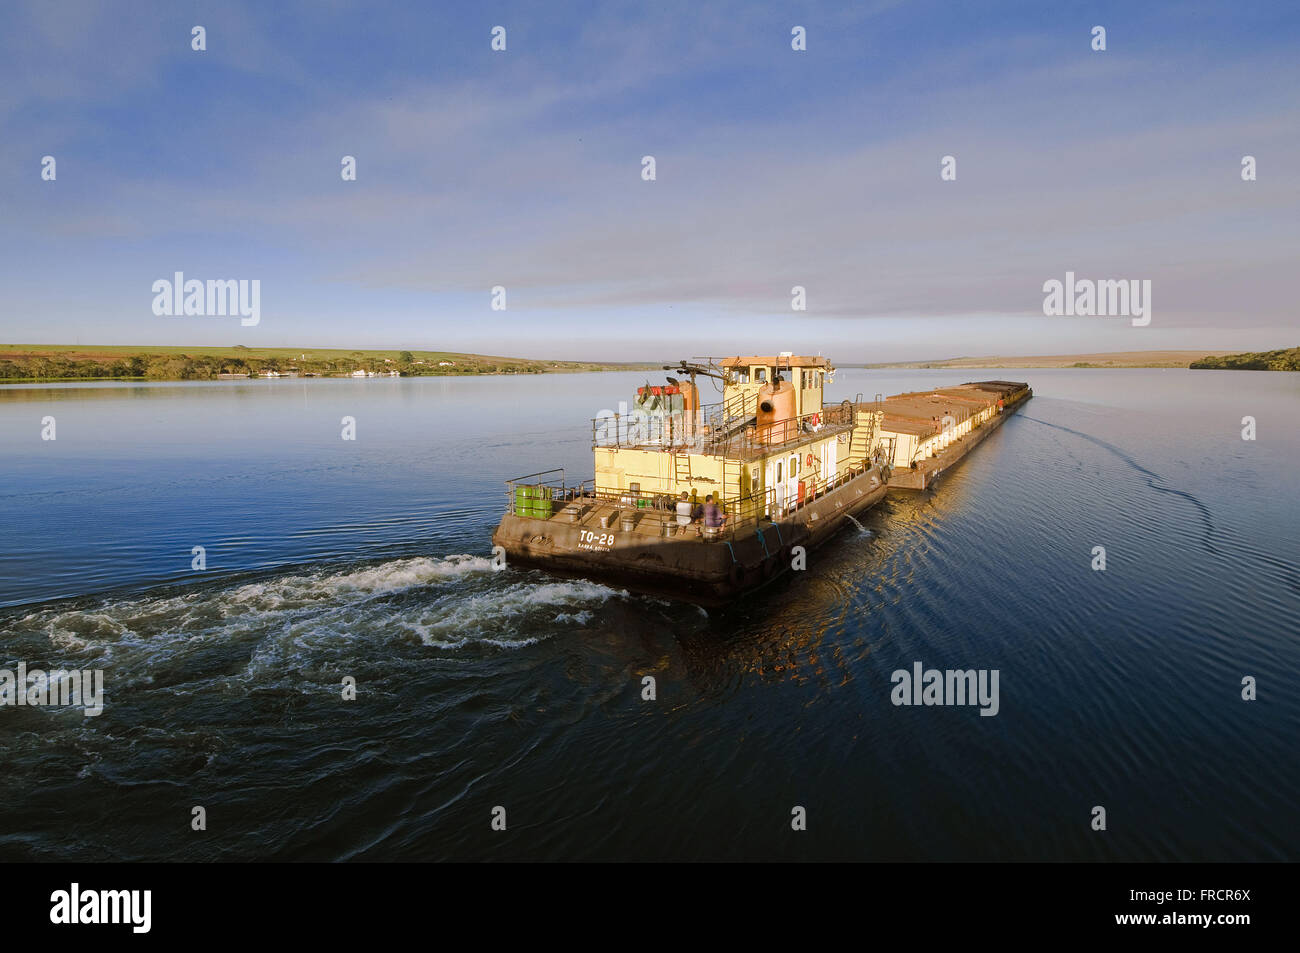 Barge loaded with soya browsing the Hydropower Plant Reservoir Bariri Stock Photo